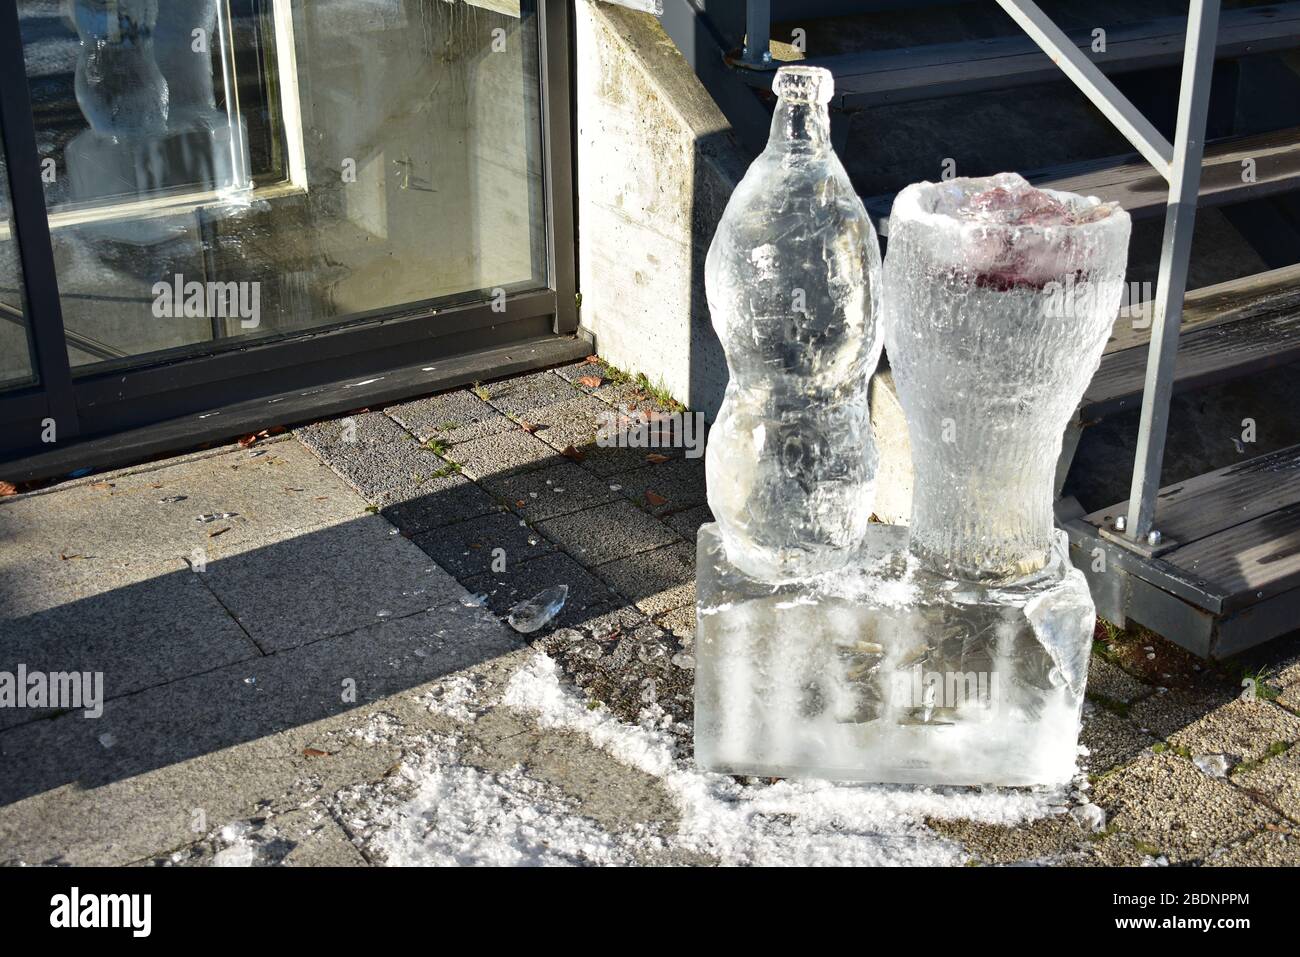 Ice sculpture of a soda bottle and glass in Uetliberg Stock Photo